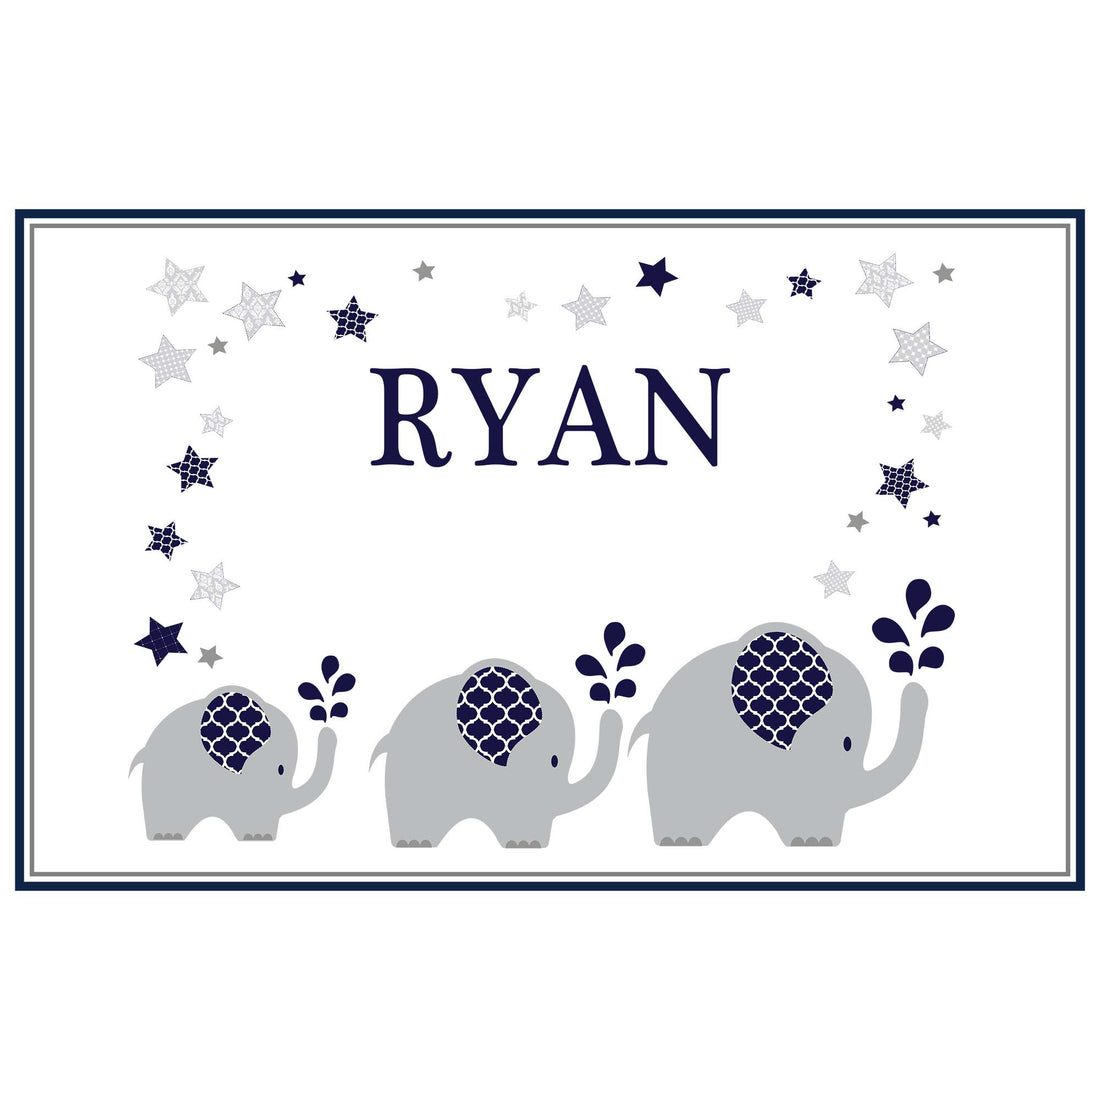 Personalized Placemat with Navy Elephant design